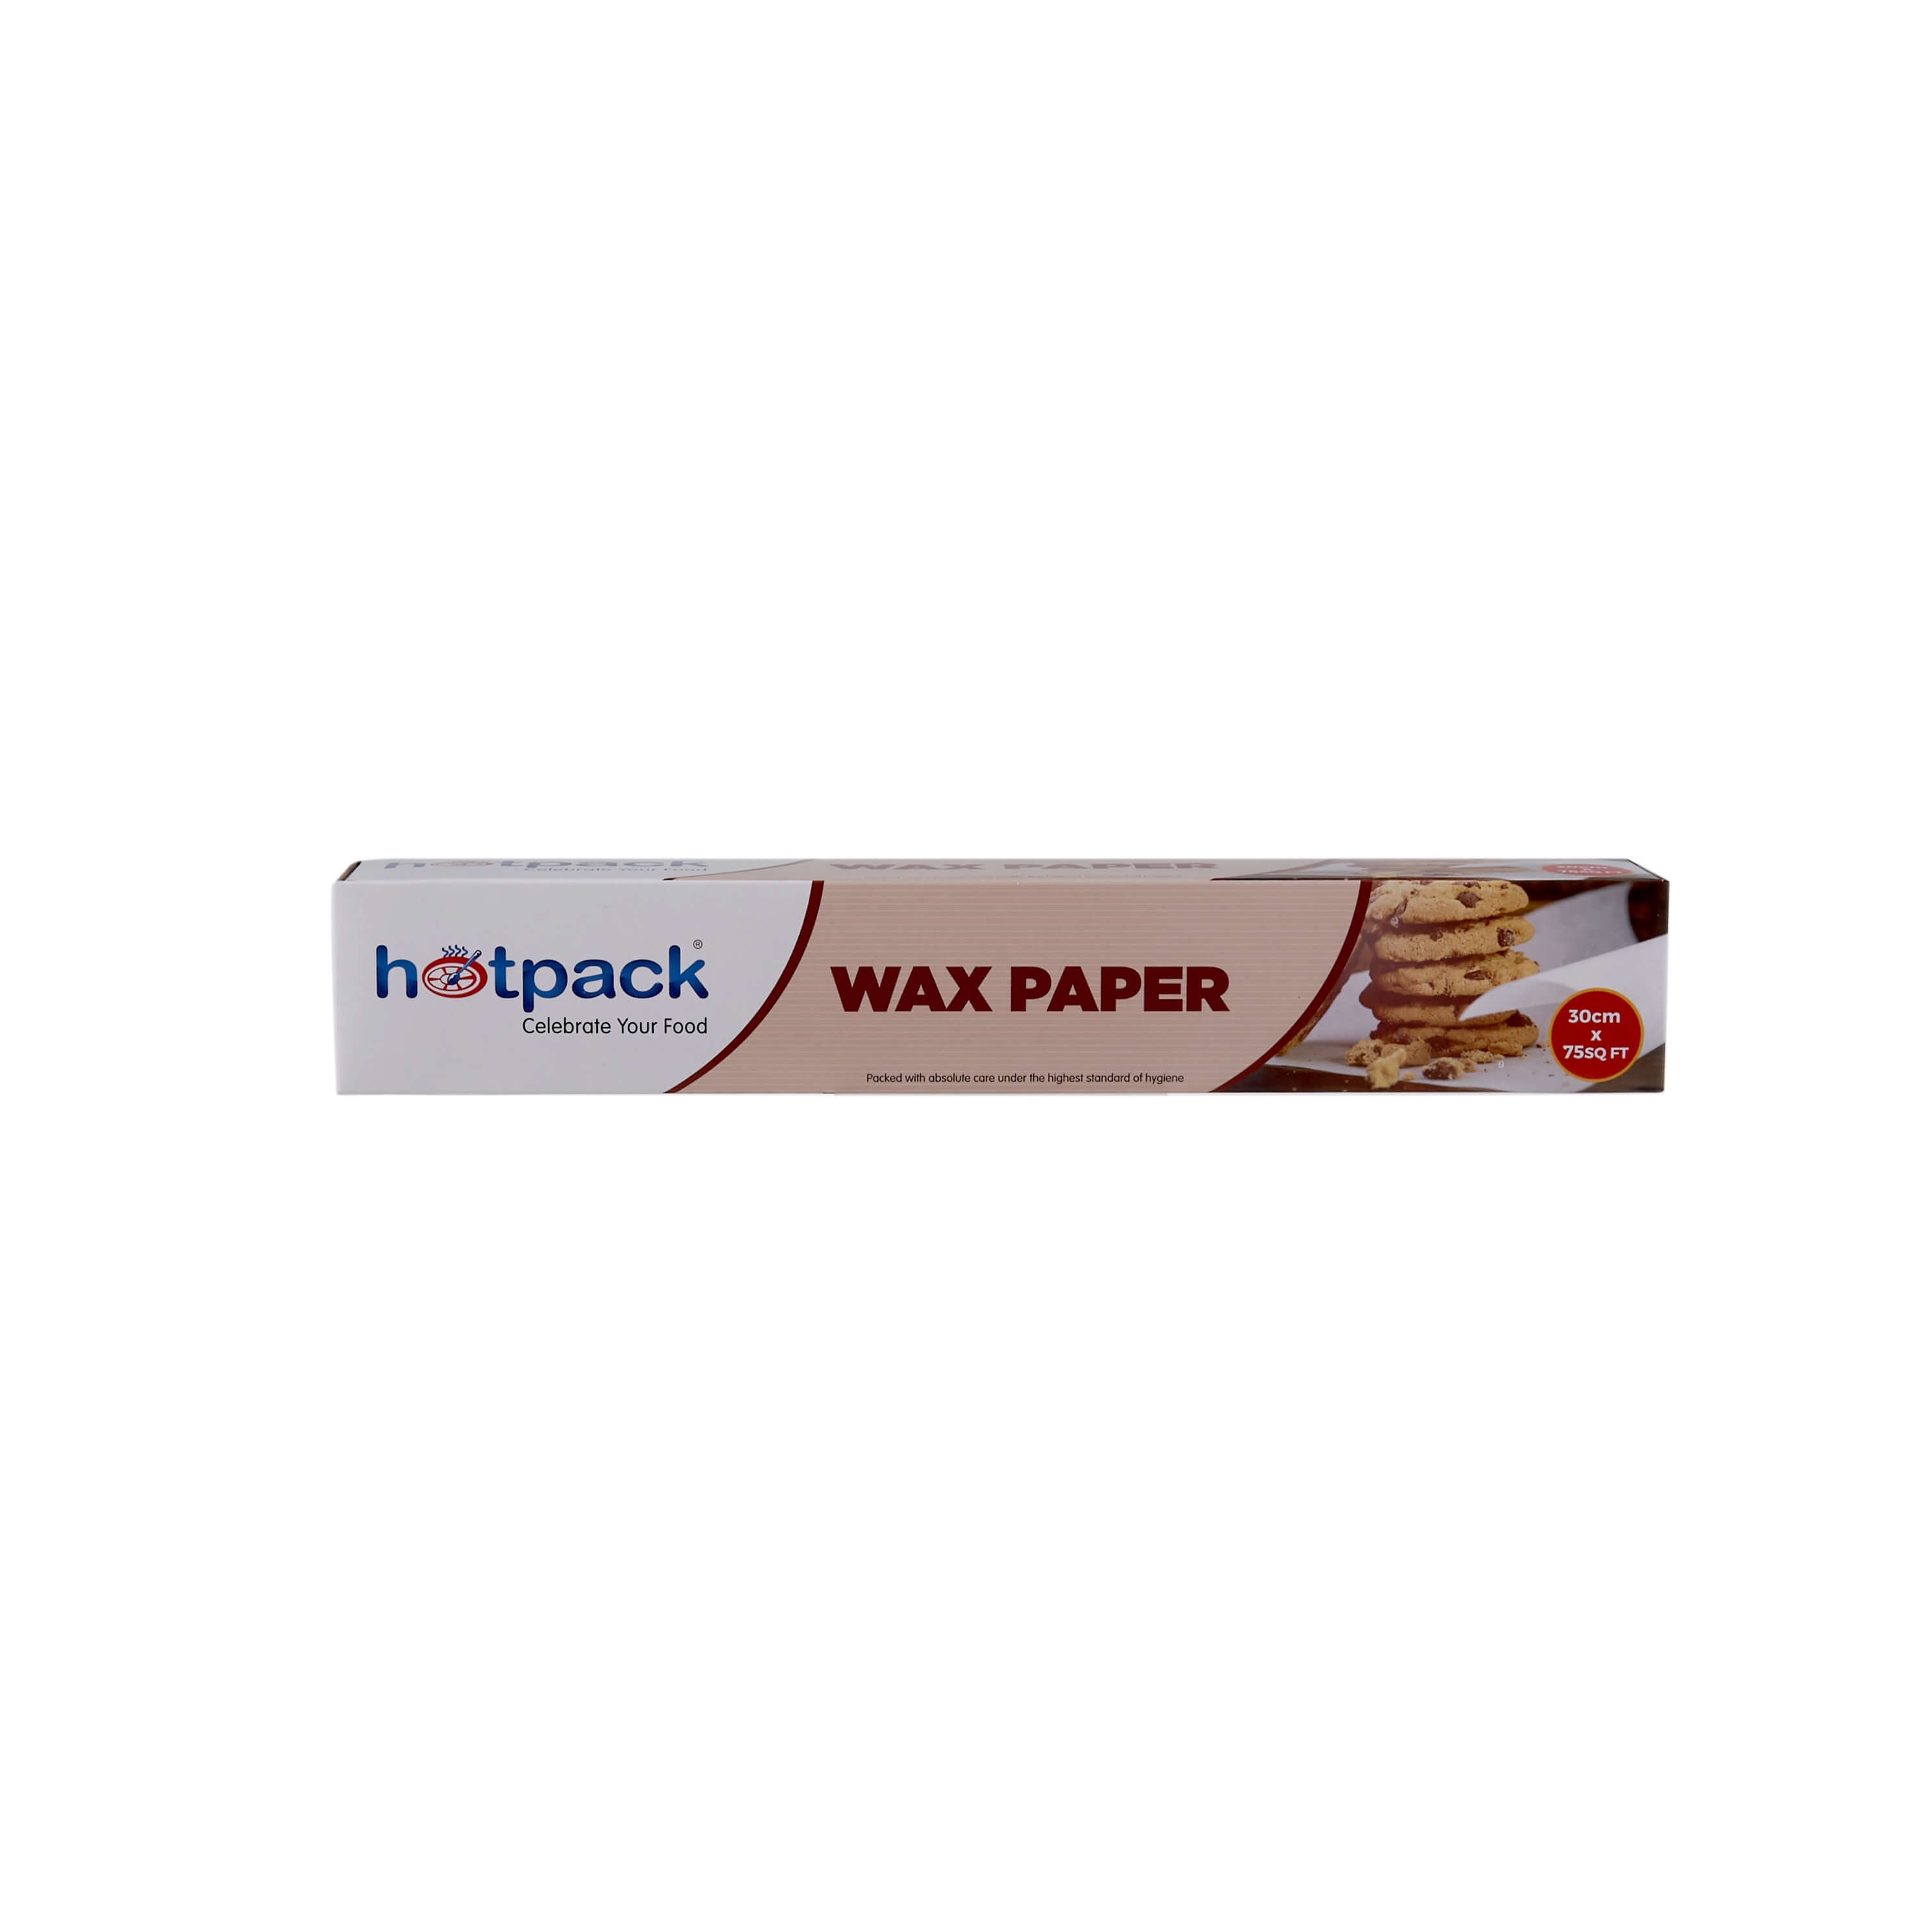 If You Care Waxed Paper - Natural - Case of 12 - 75 Sq. ft.